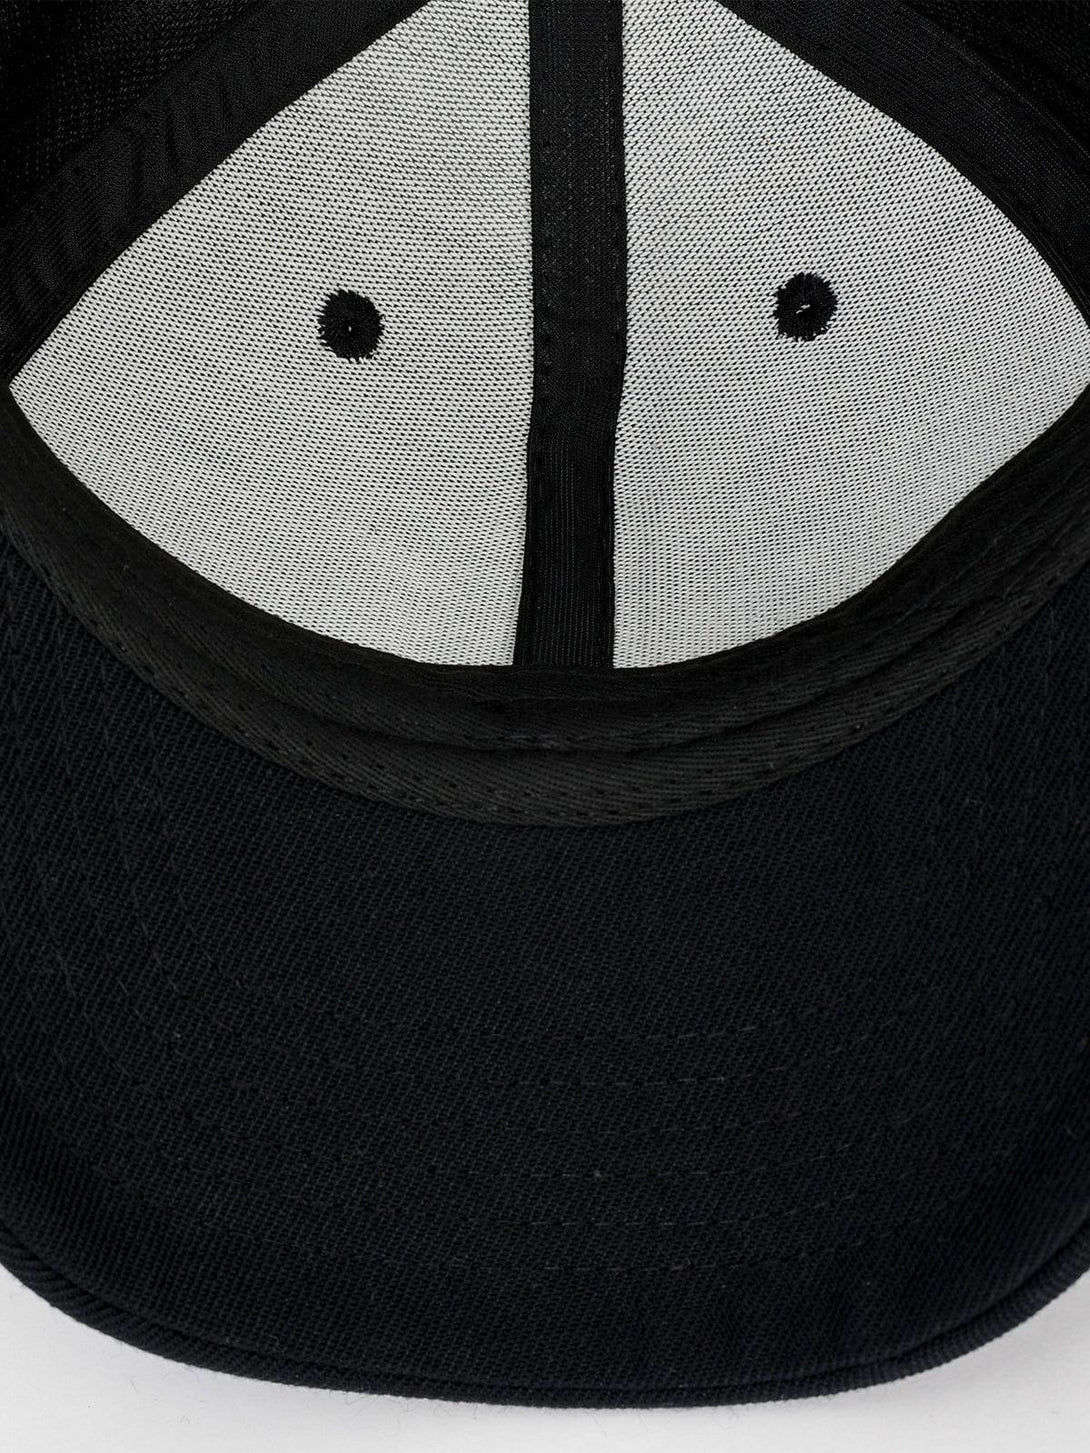 Levefly - Letter Embroidery Cap - Streetwear Fashion - levefly.com